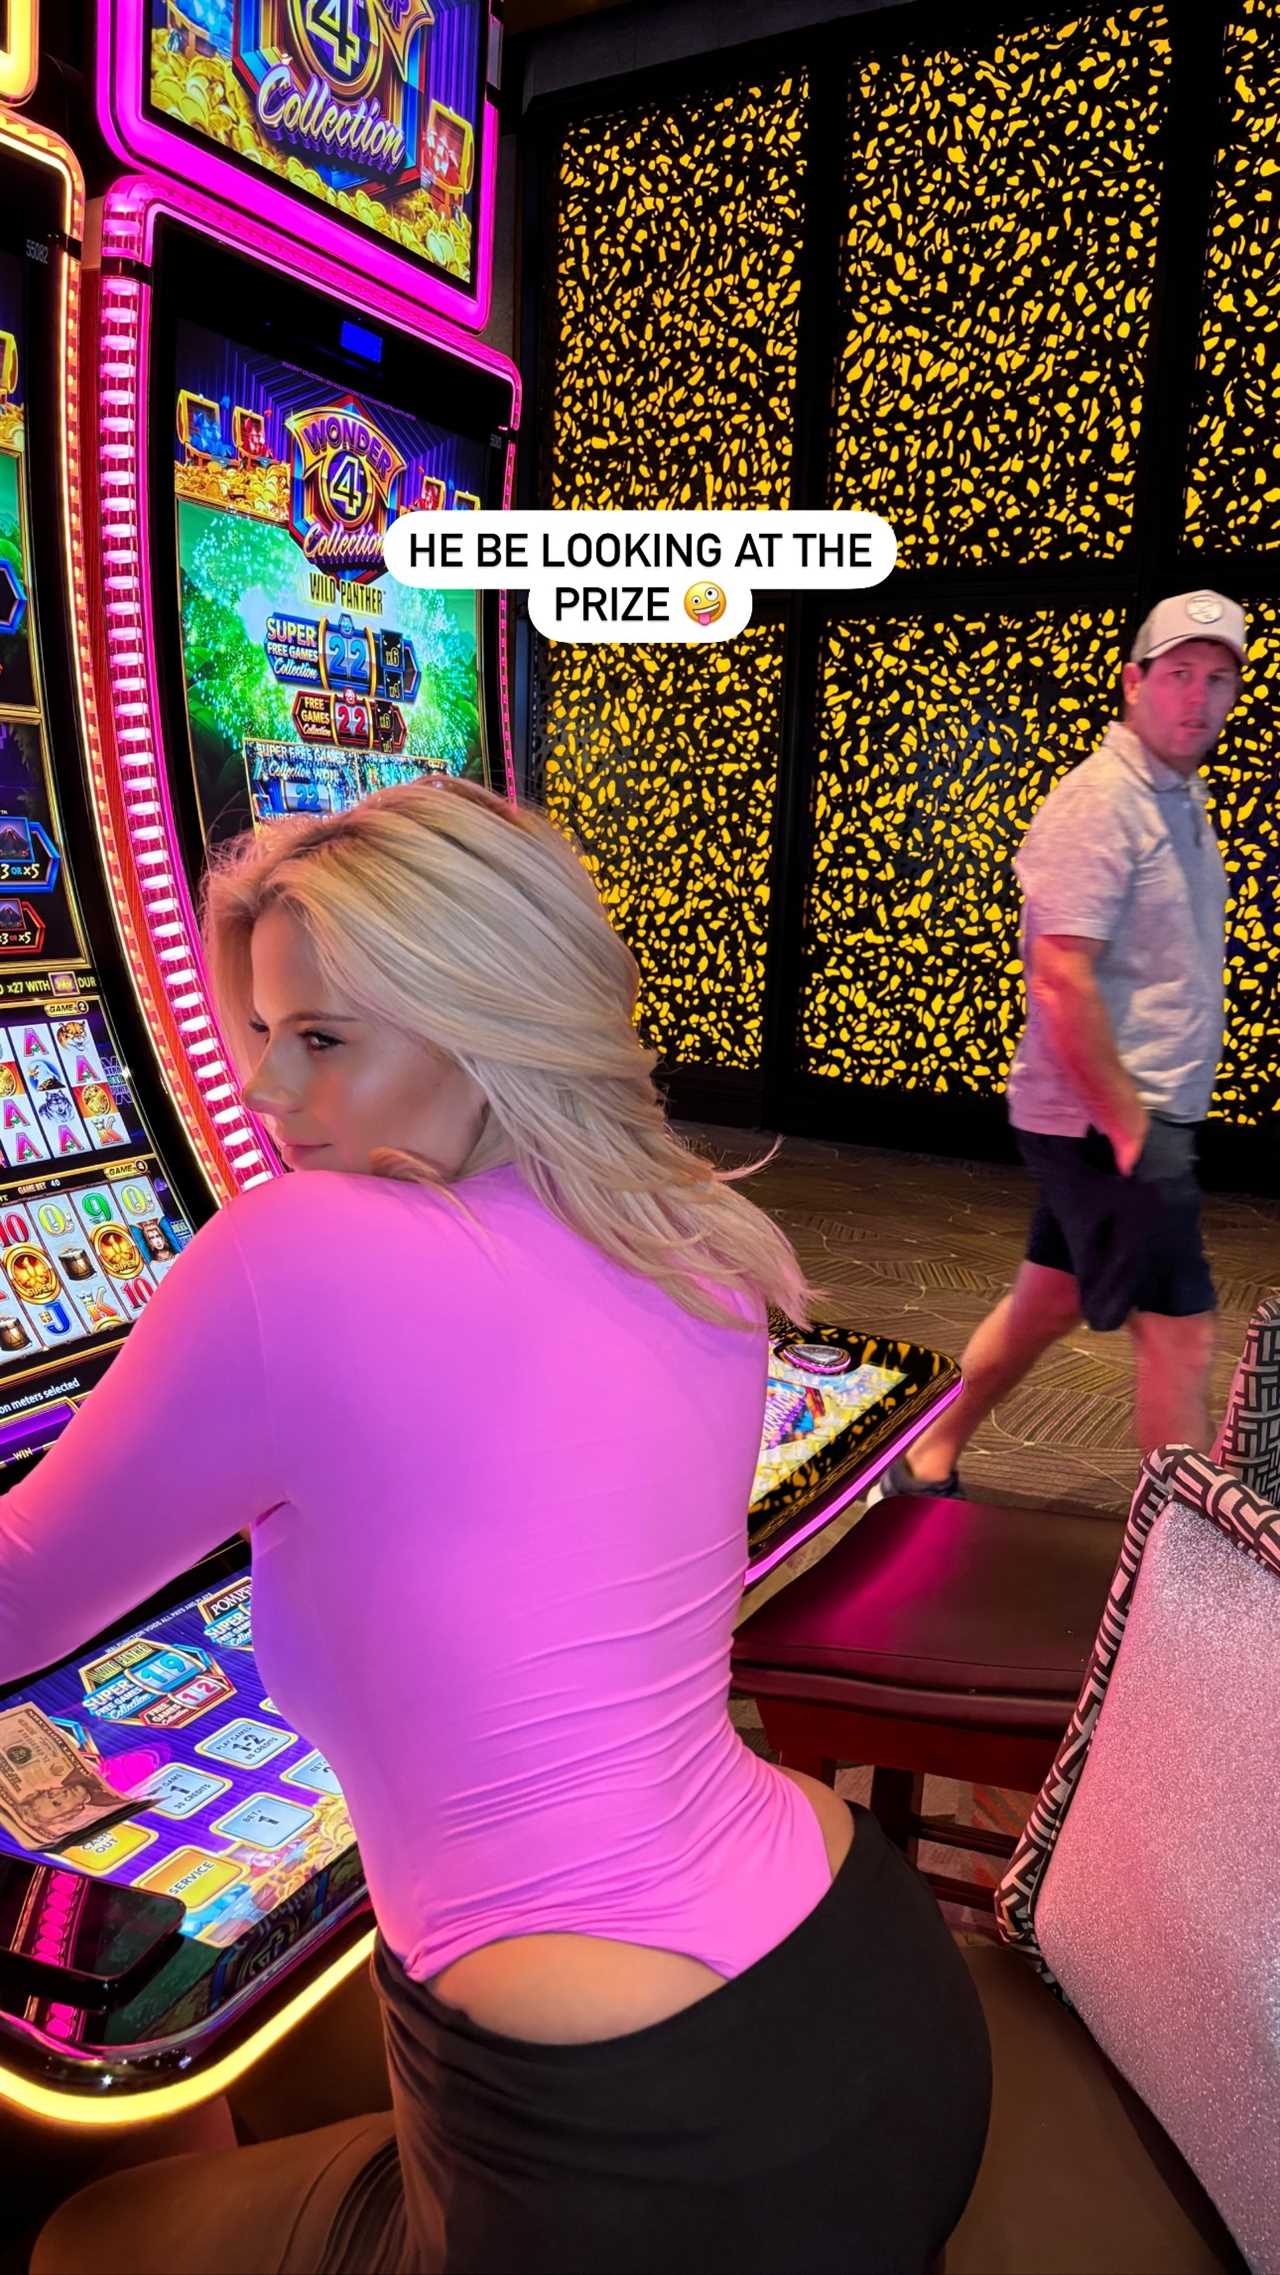 Boxing Ring Girl Apollonia Llewellyn Turns Heads in Busty Outfit on Las Vegas Slot Machine